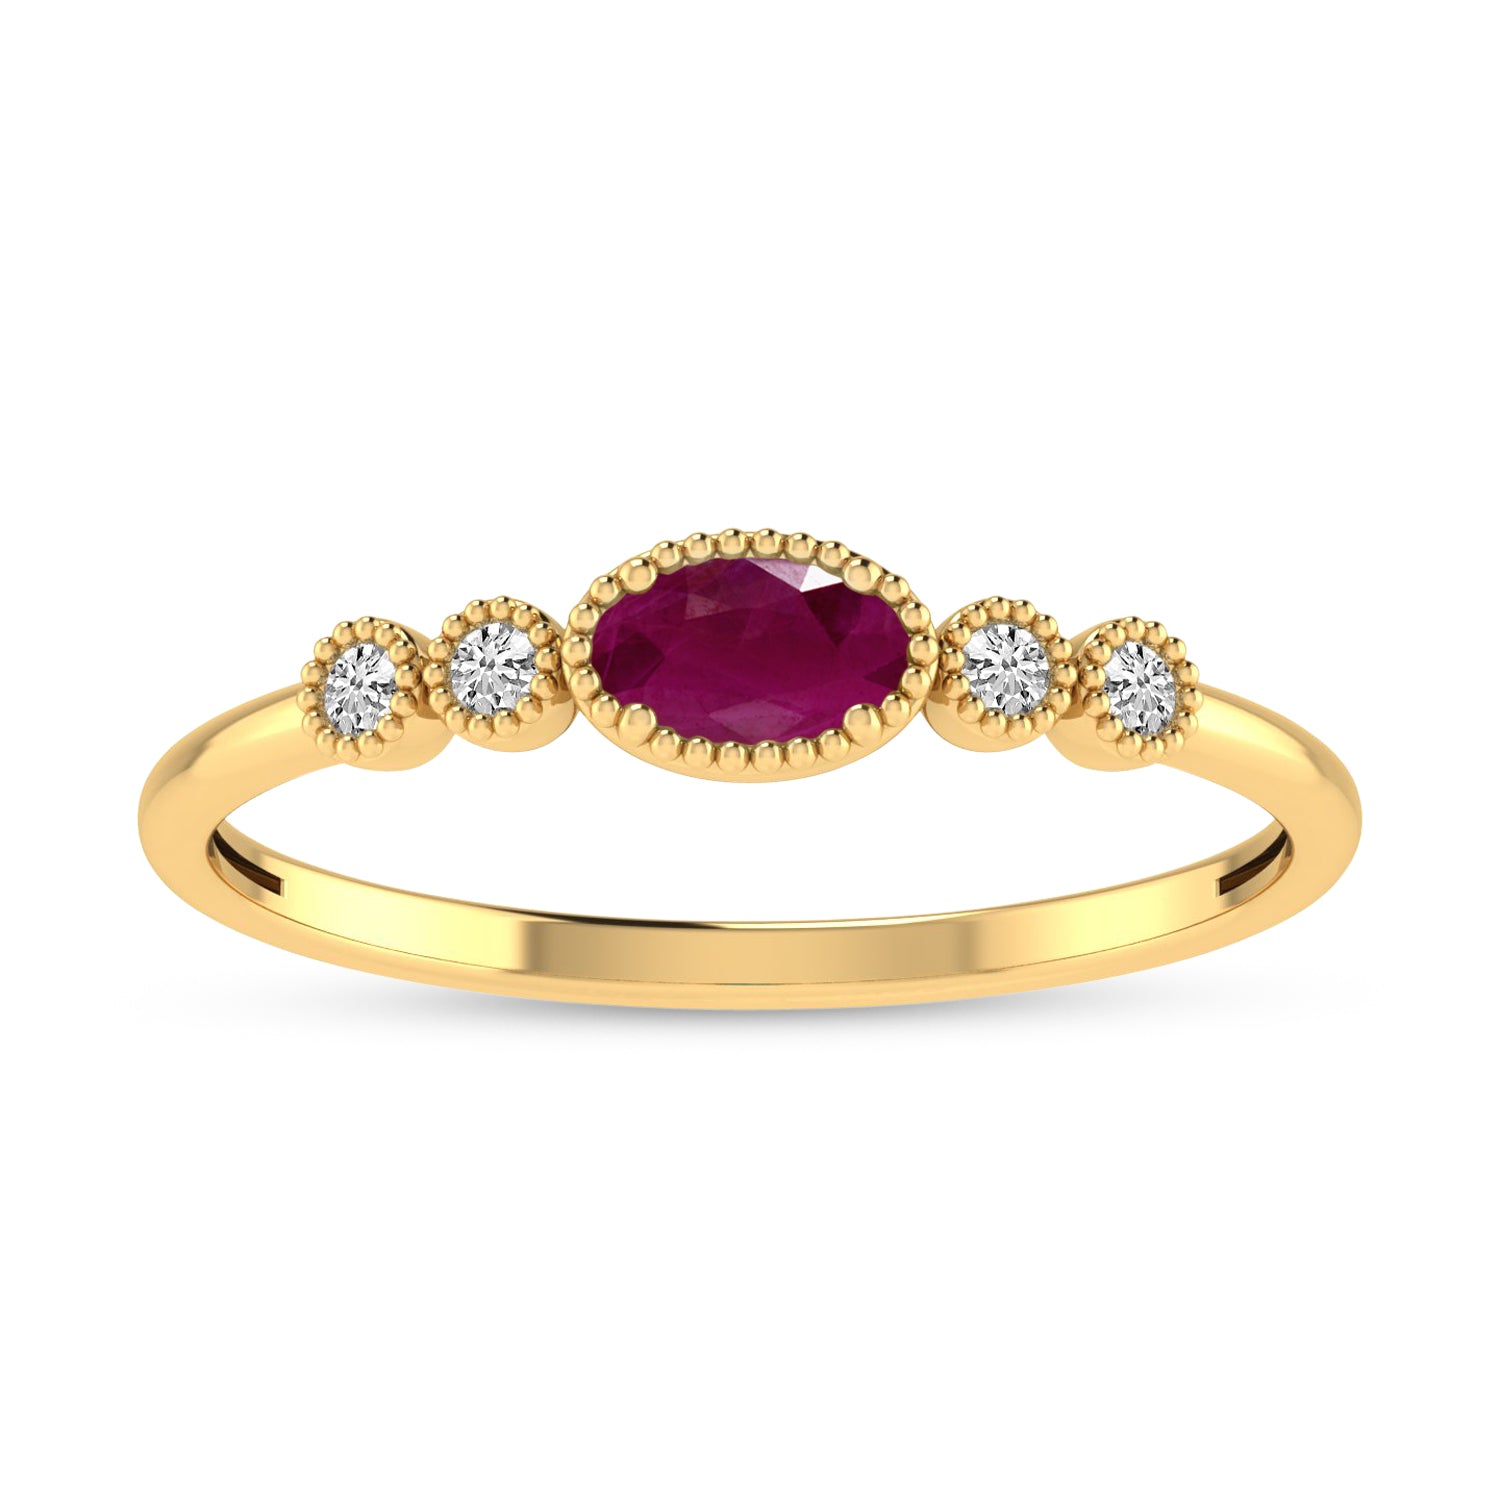 14K Yellow Gold Oval Ruby and Diamond Stackable Ring RM4307X-JUL